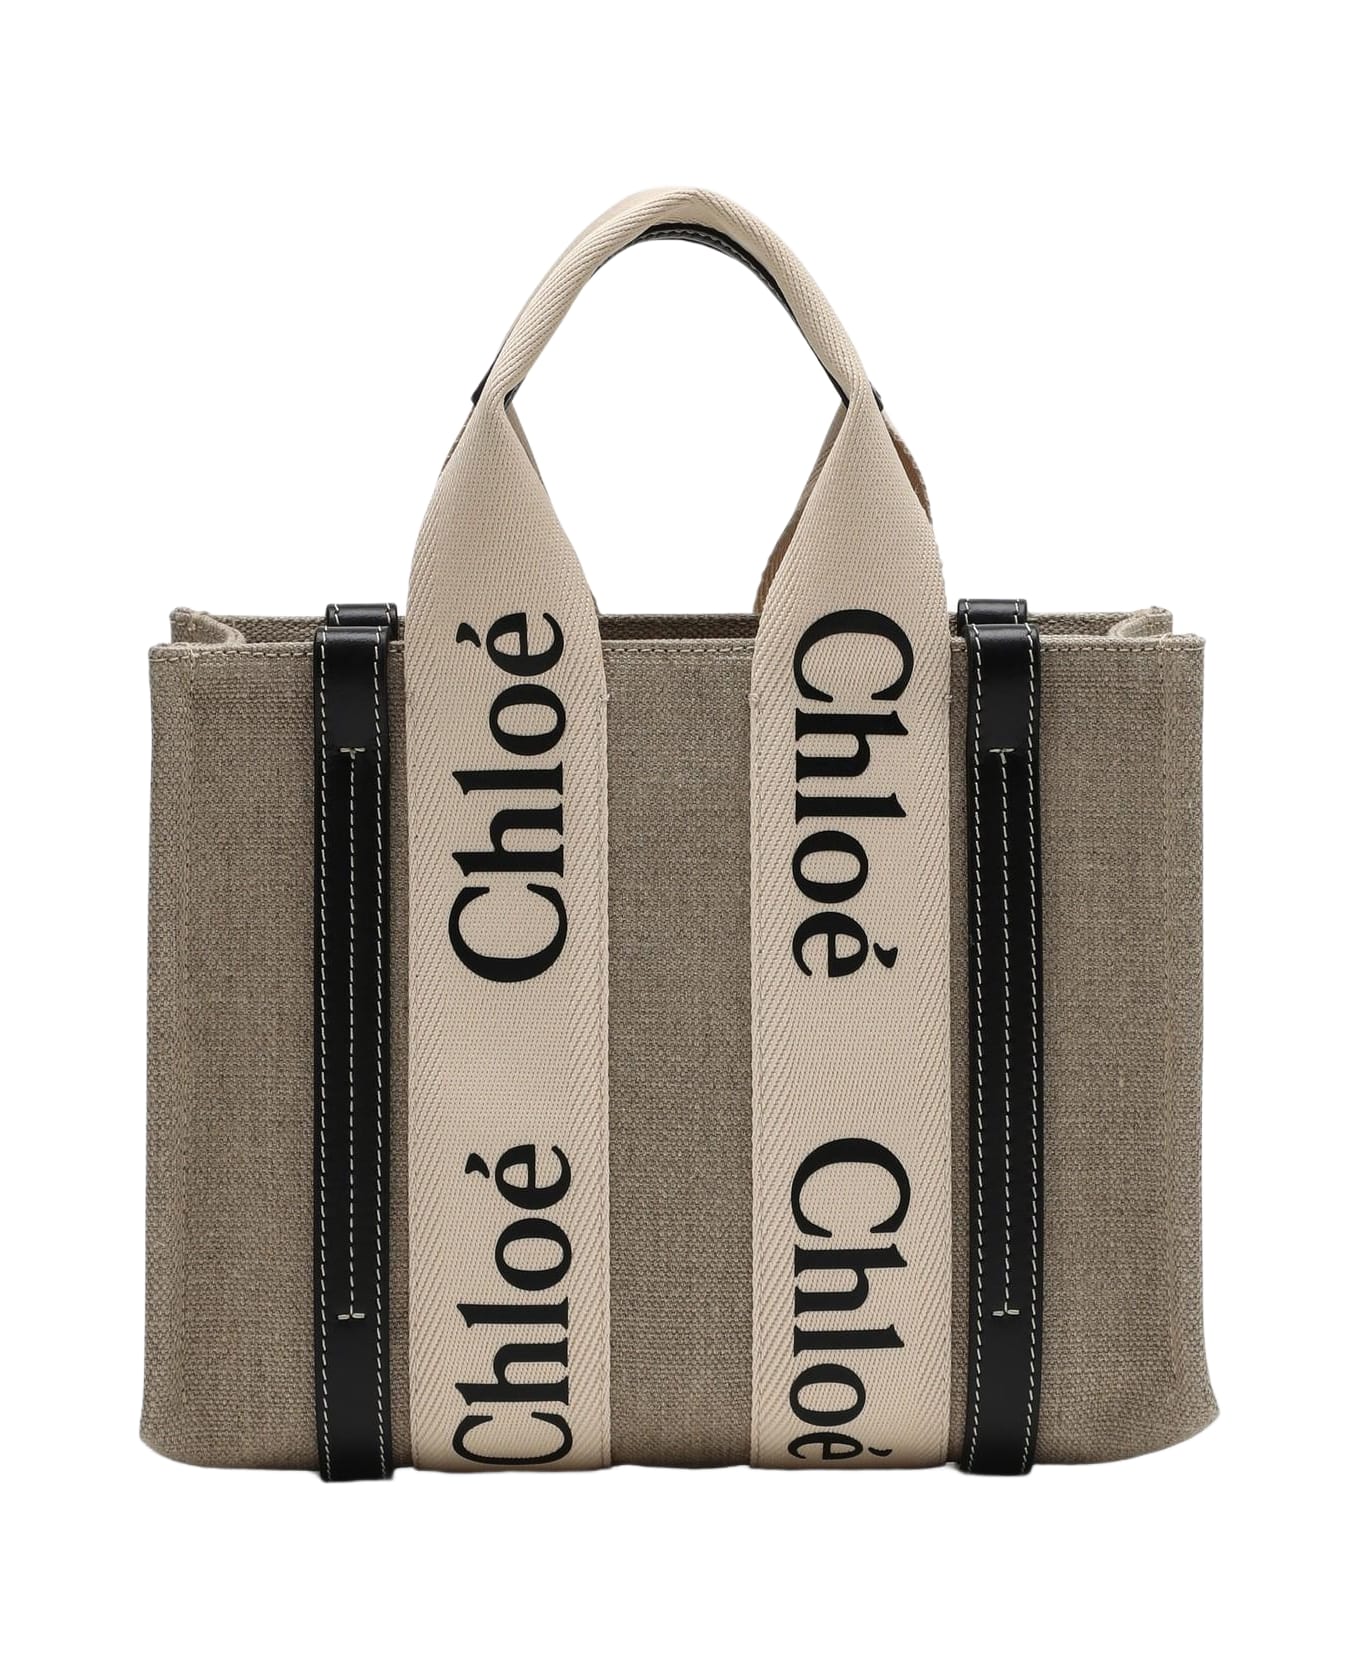 Chloé Women's Leather Tote Bag